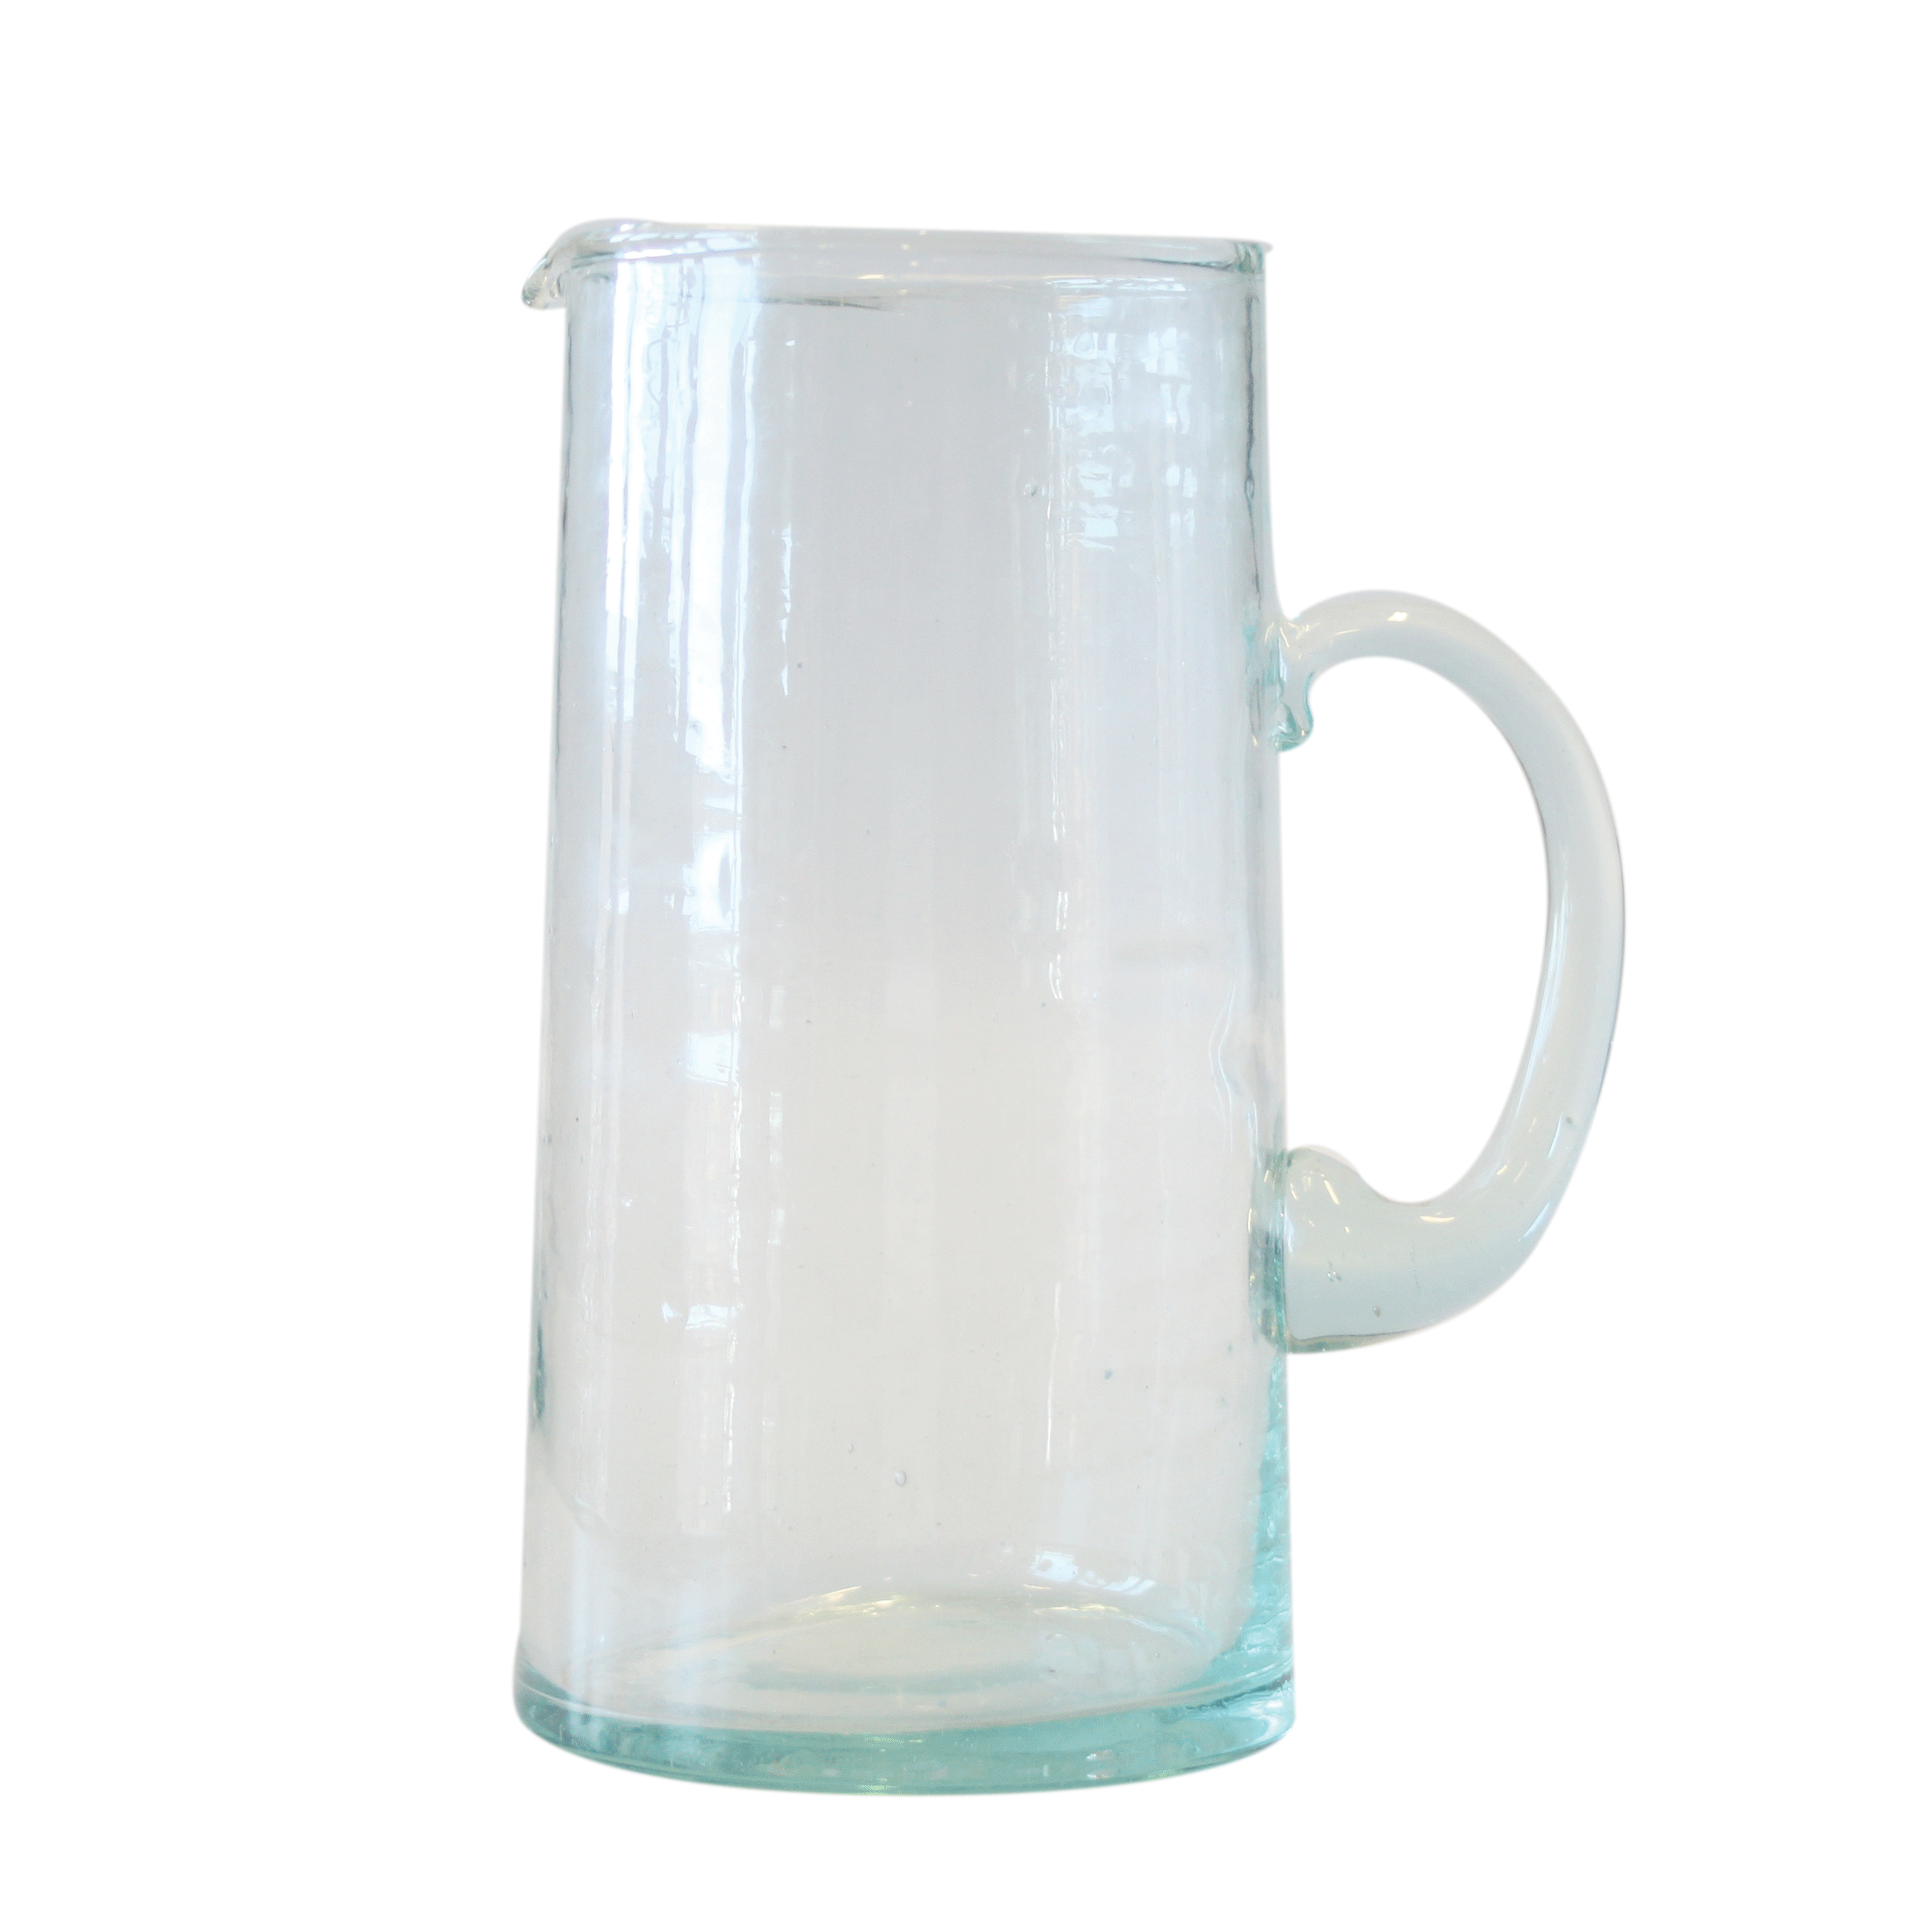 Urban Nature Culture Jug Recycled Morocco glass - CARAFE